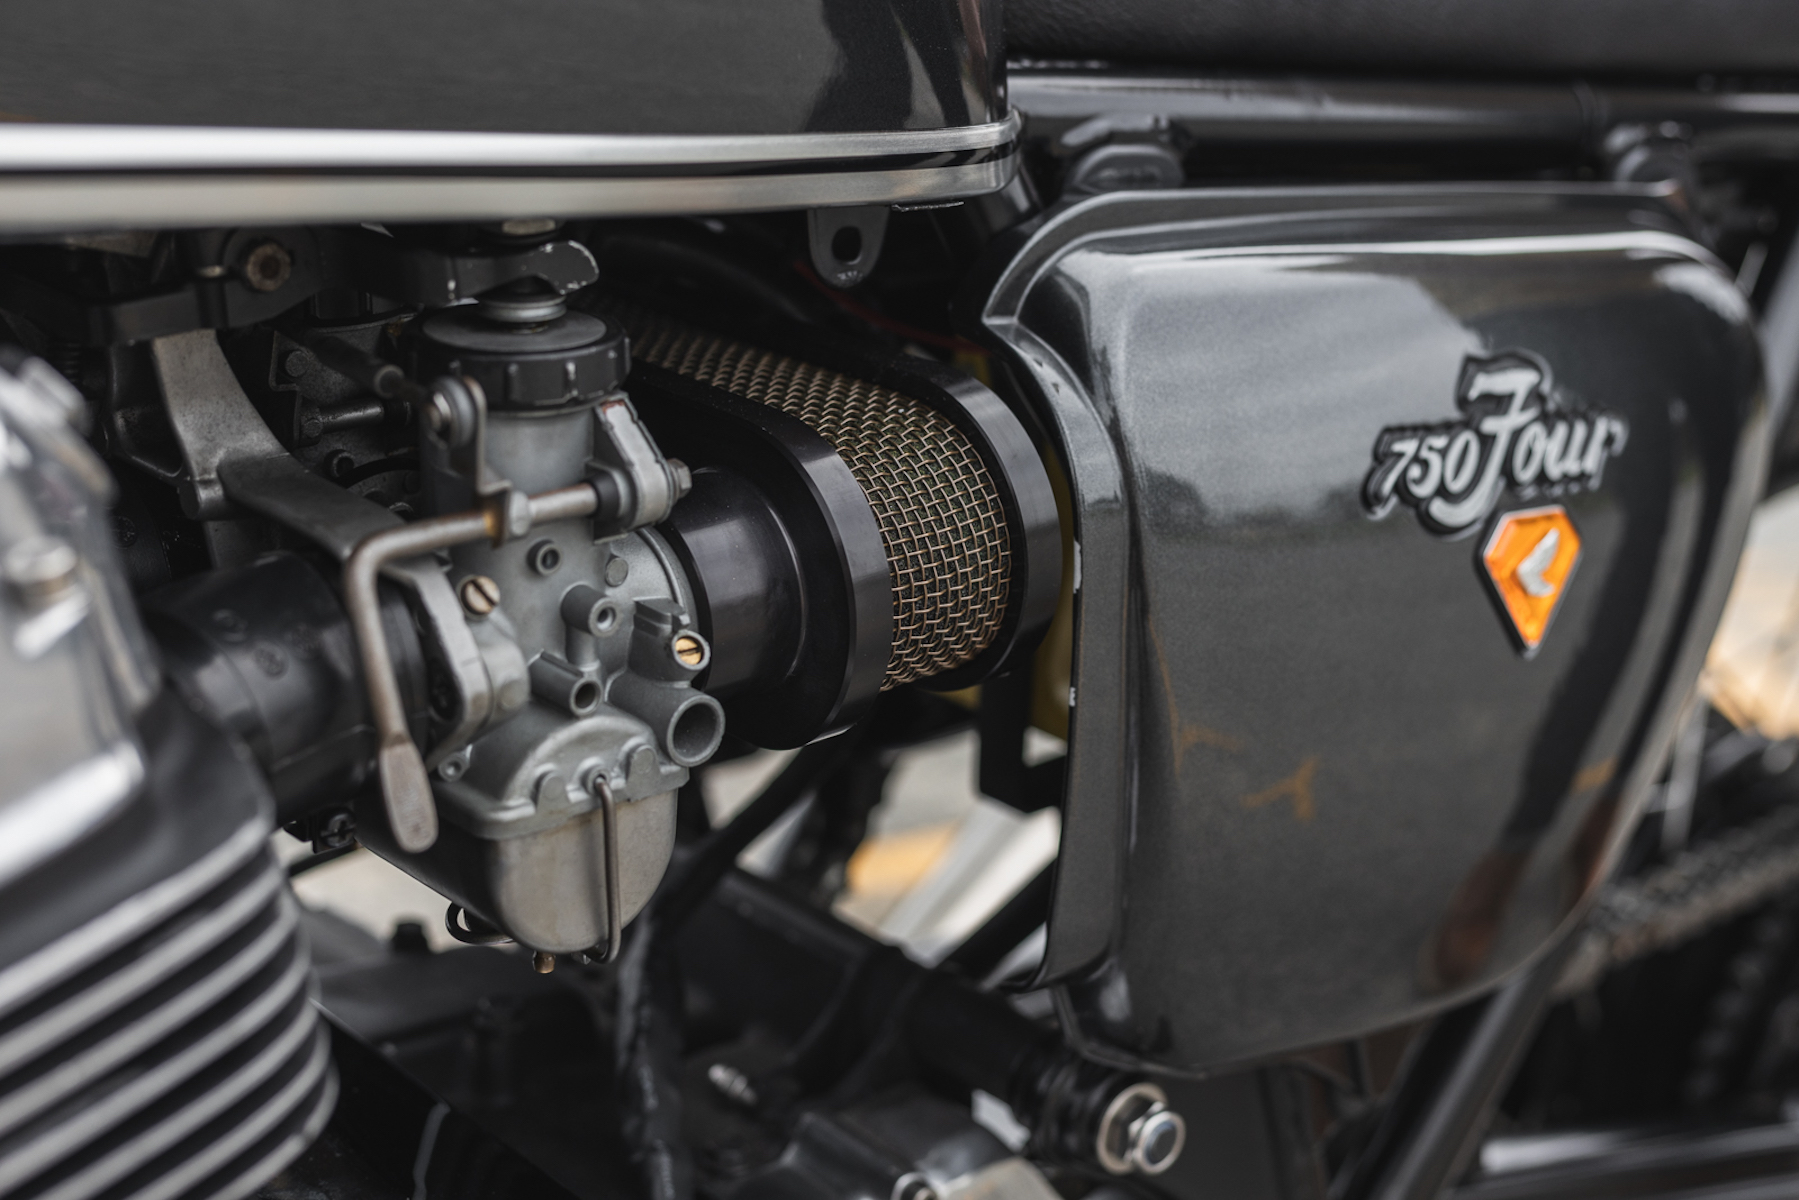 A close-up of a Honda CB750, focusing on the body and chassis of the bike.